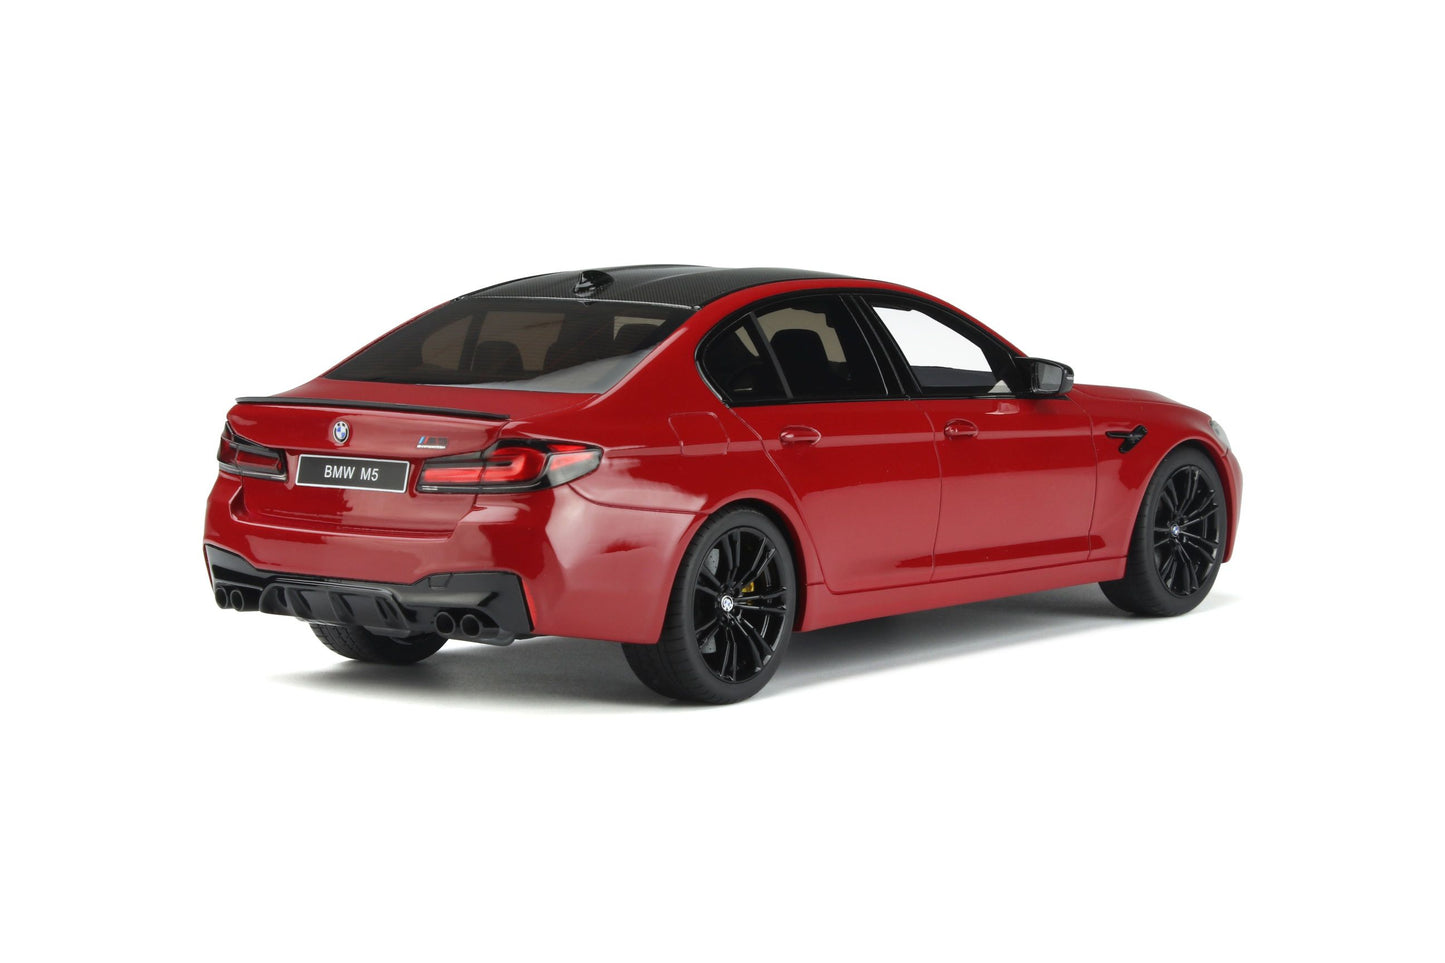 GT Spirit - BMW M5 Competition (F90) (Imola Red) 1:18 Scale Model Car